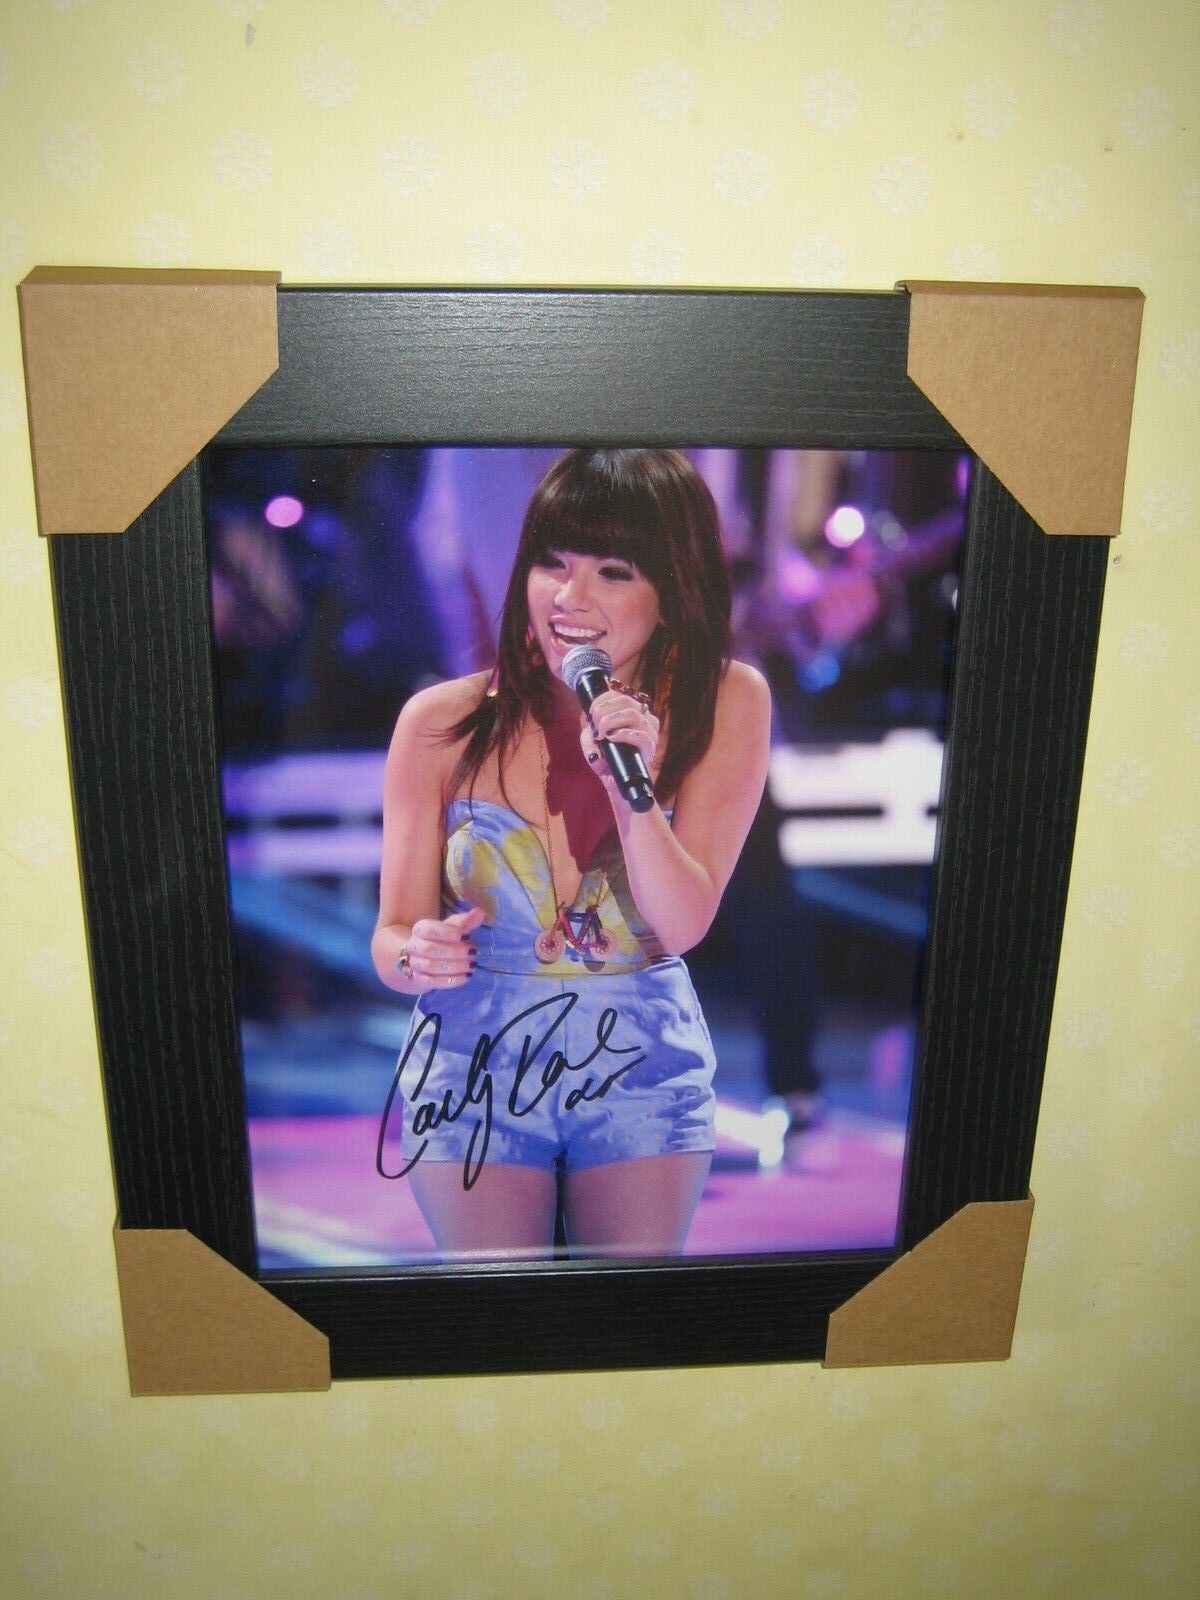 Carly Rae Jepsen Gorgeous Framed Signed Photograph (10X8) with CoA - FREEPOST Nowe tanie